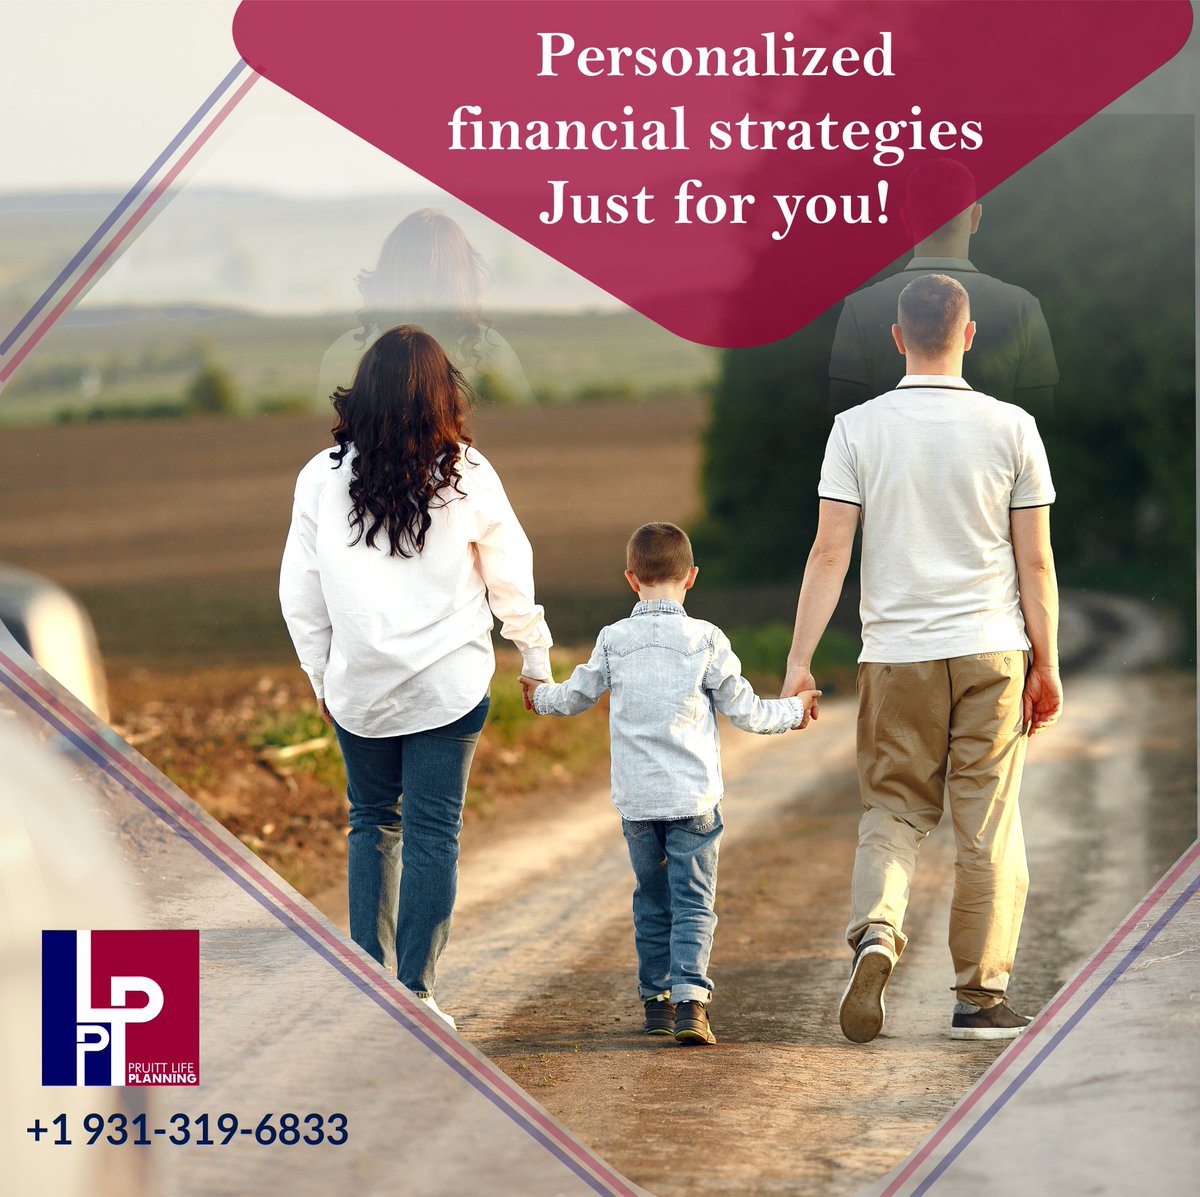 Unlock the power of personalized financial strategies with Pruitt Life Planning. Let's tailor a plan to fit your unique goals and dreams.

Call Us On +1 931-319-6833

#PruittLifePlanning #FinancialStrategies #PersonalizedPlanning #WealthManagement #FinancialFreedom #DreamBig